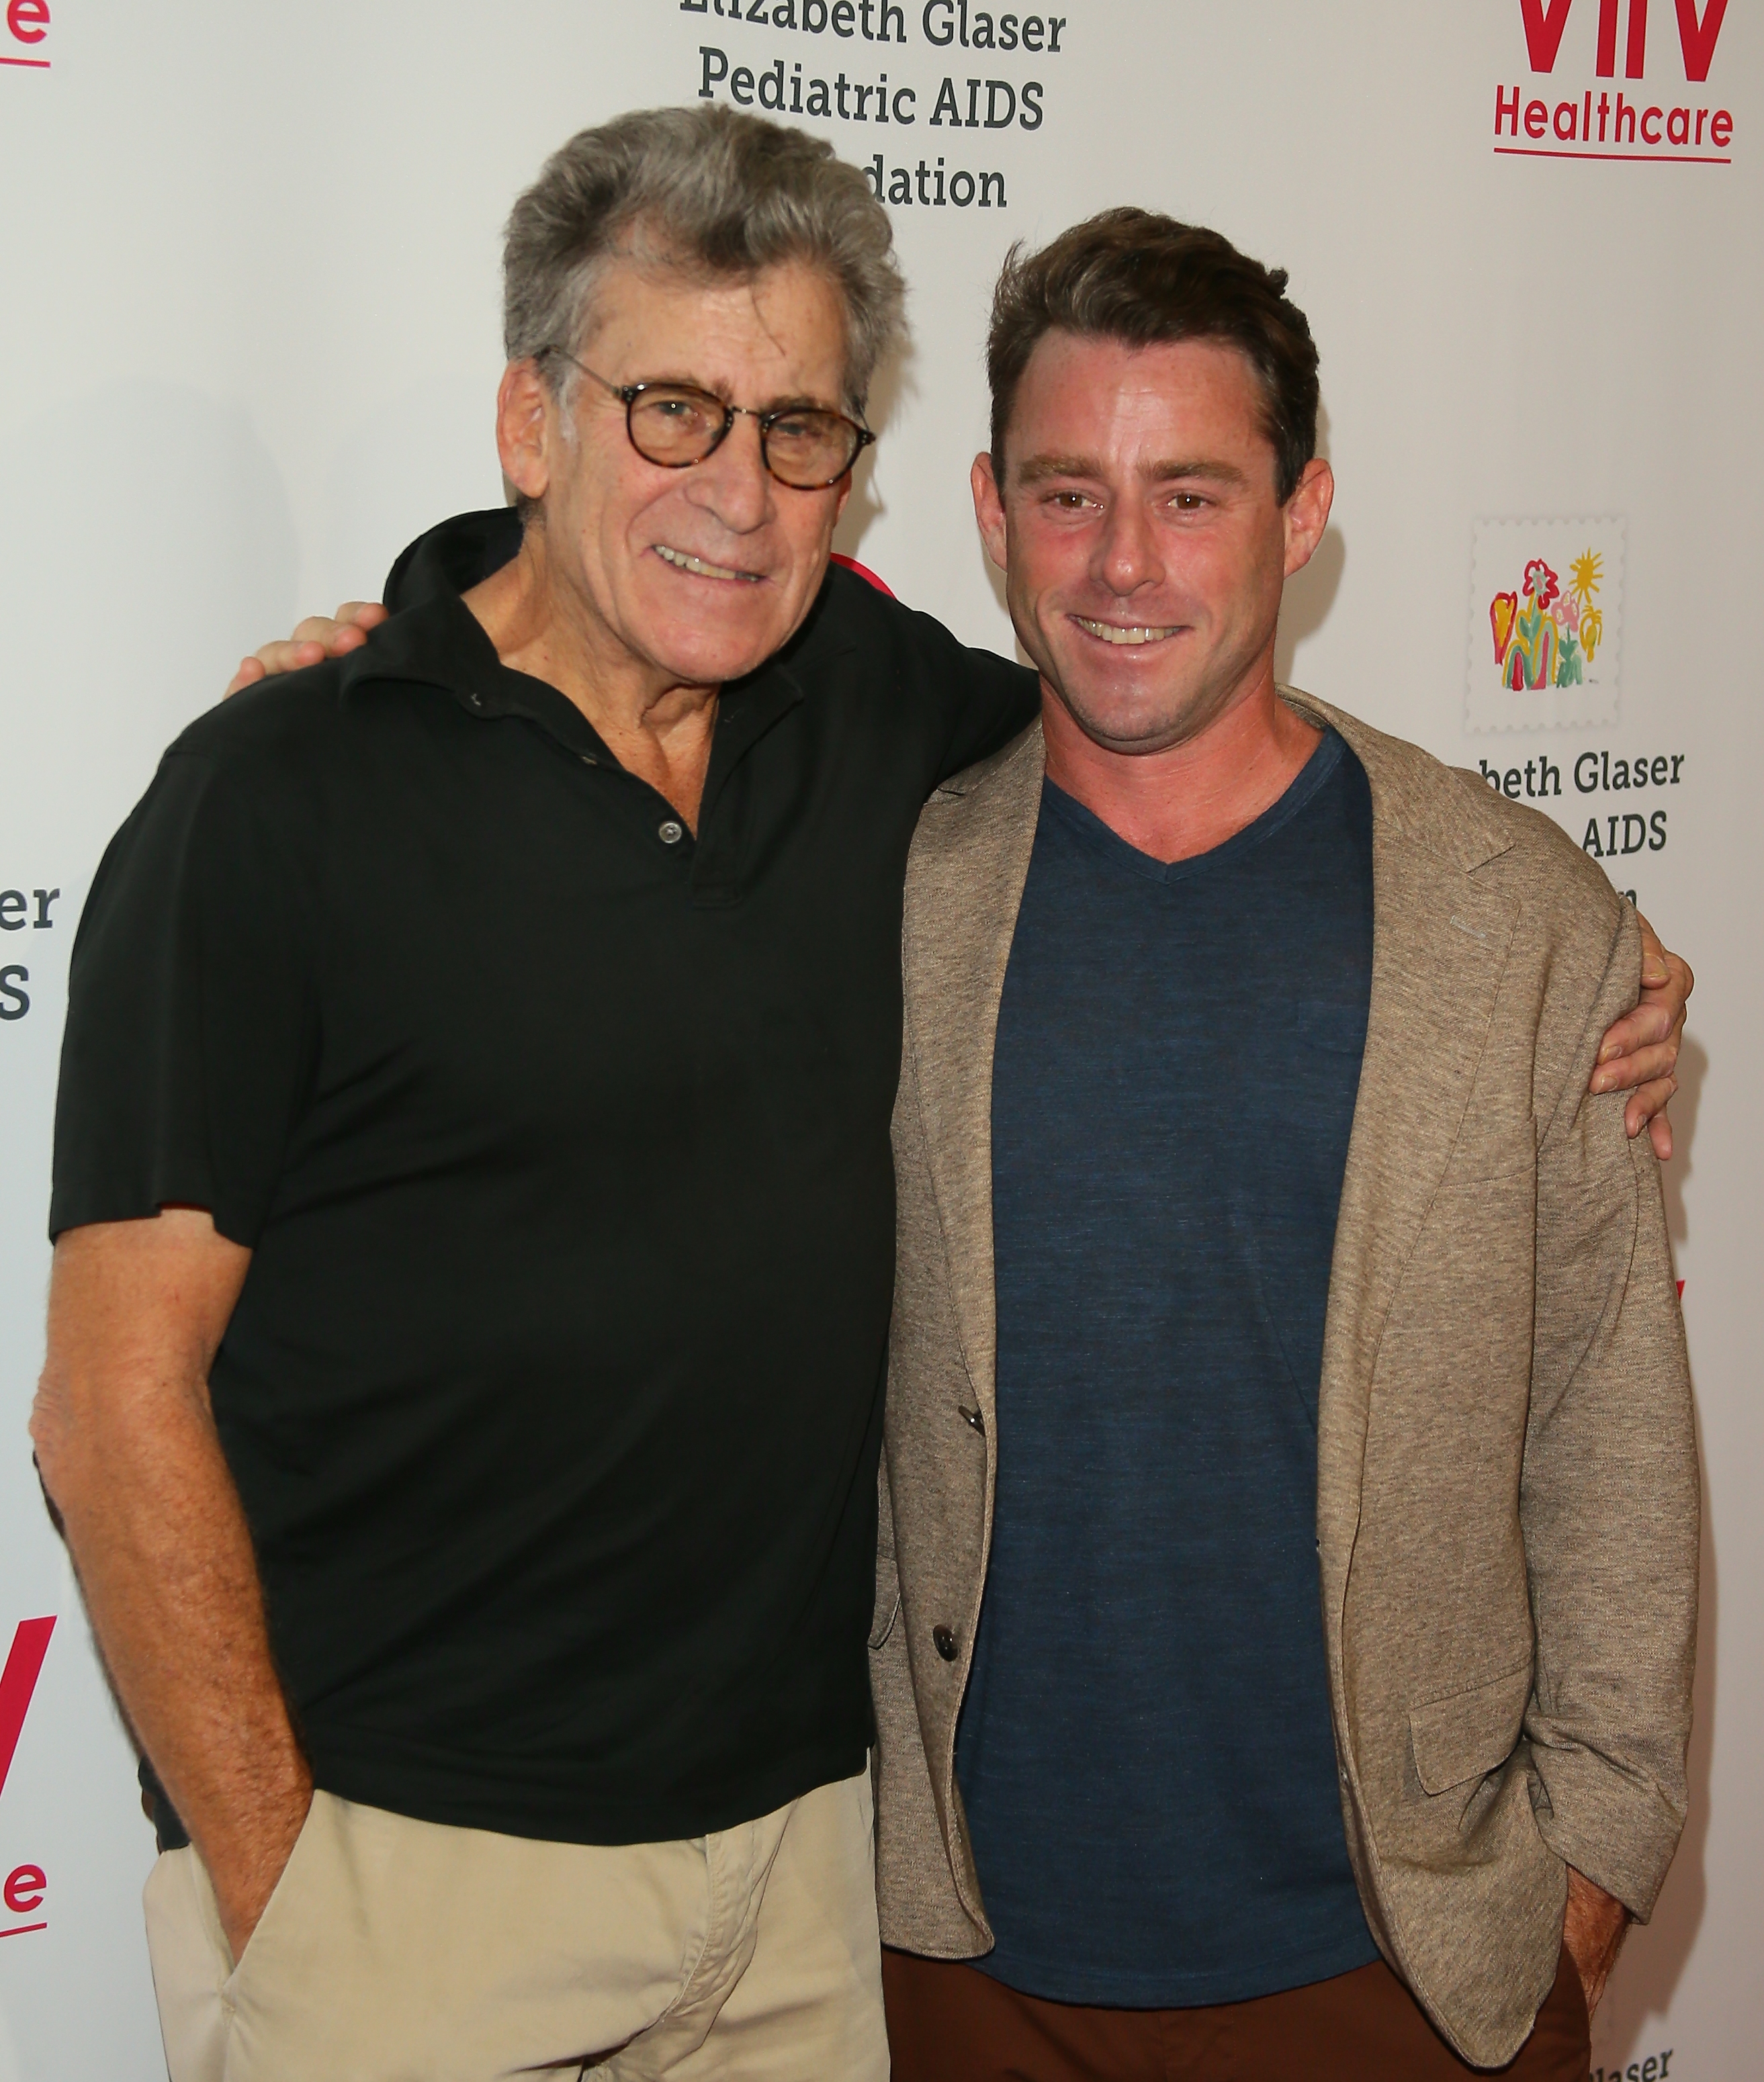 Paul Michael Glaser and his son Jake Glaser attend the Elizabeth Glaser Pediatric AIDS Foundation's 30th Annual A Time for Heroes Family Festival at Smashbox Studios on October 27, 2019 in Culver City, California. | Source: Getty Images